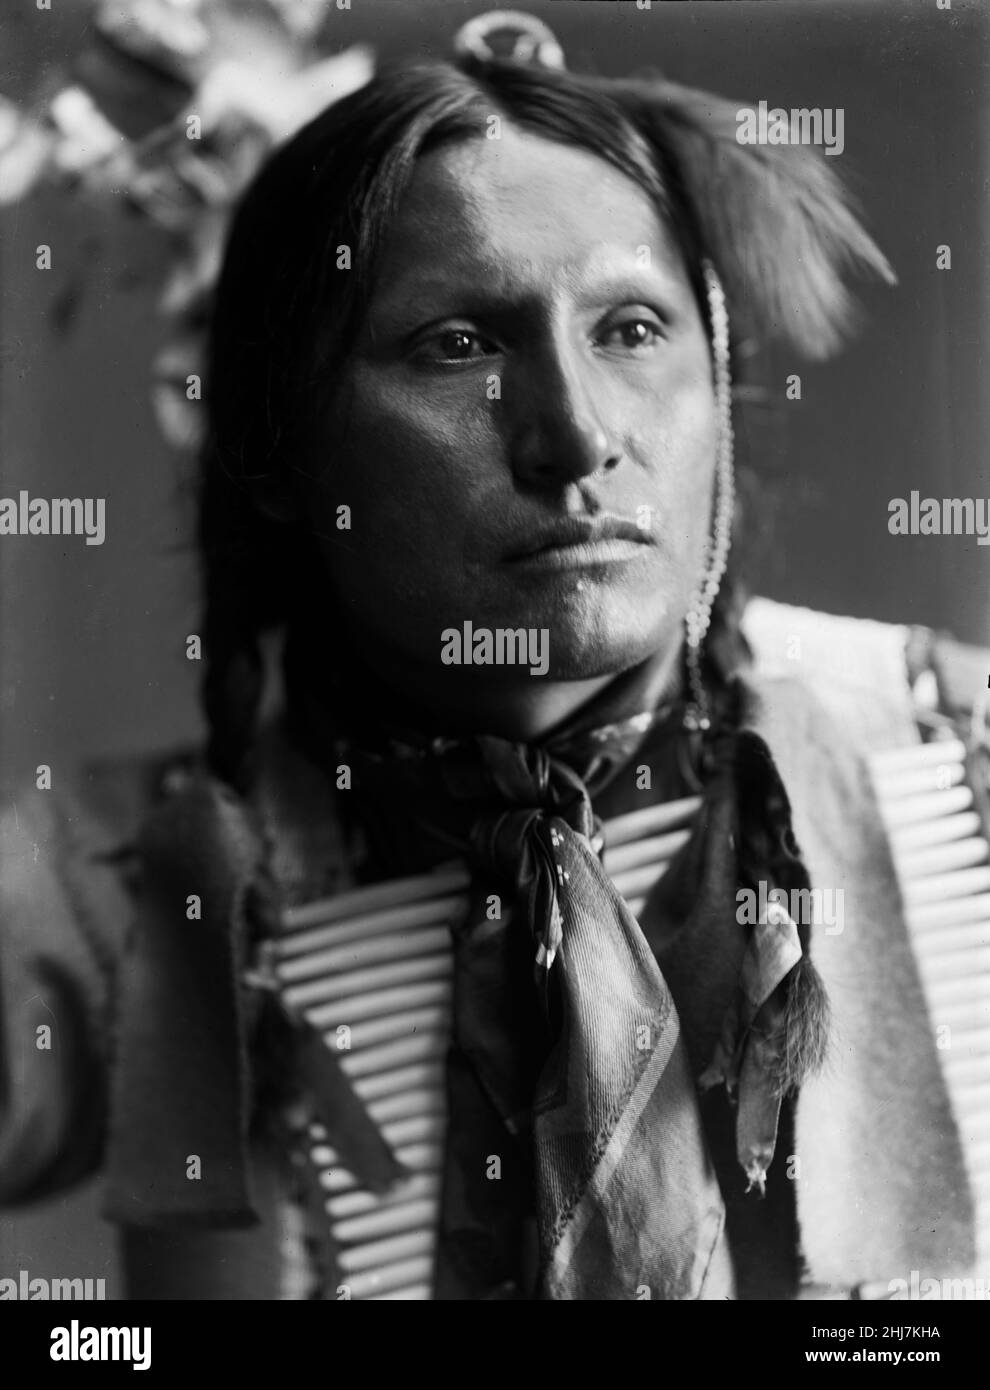 American Horse - Antique and vintage photo - Native american / Indian / American Indian. Käsebier, Gertrude, 1852-1934, photographer, 1900. Stock Photo